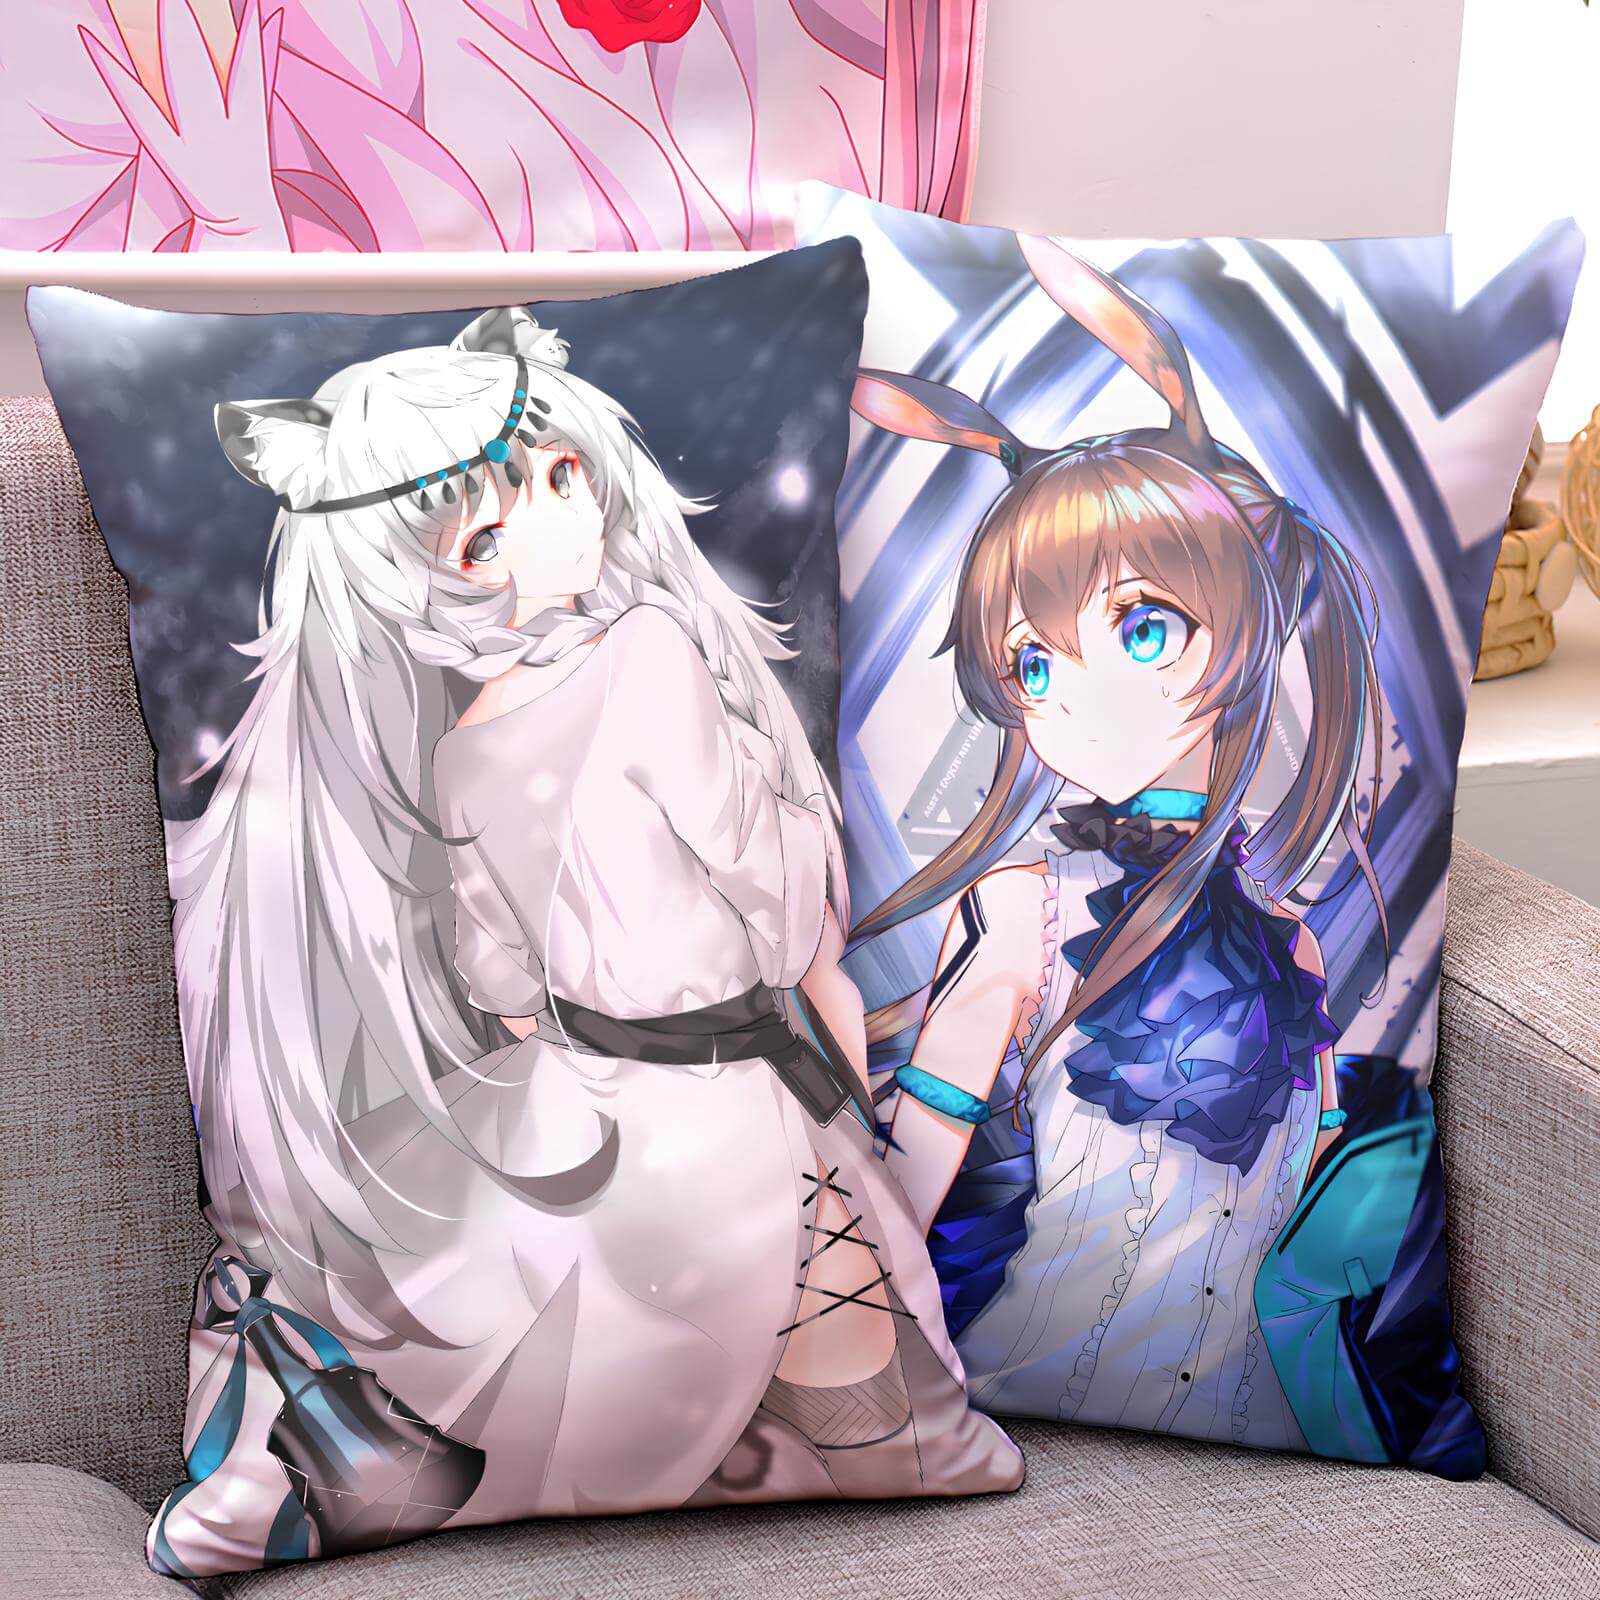 Arknights character pillow